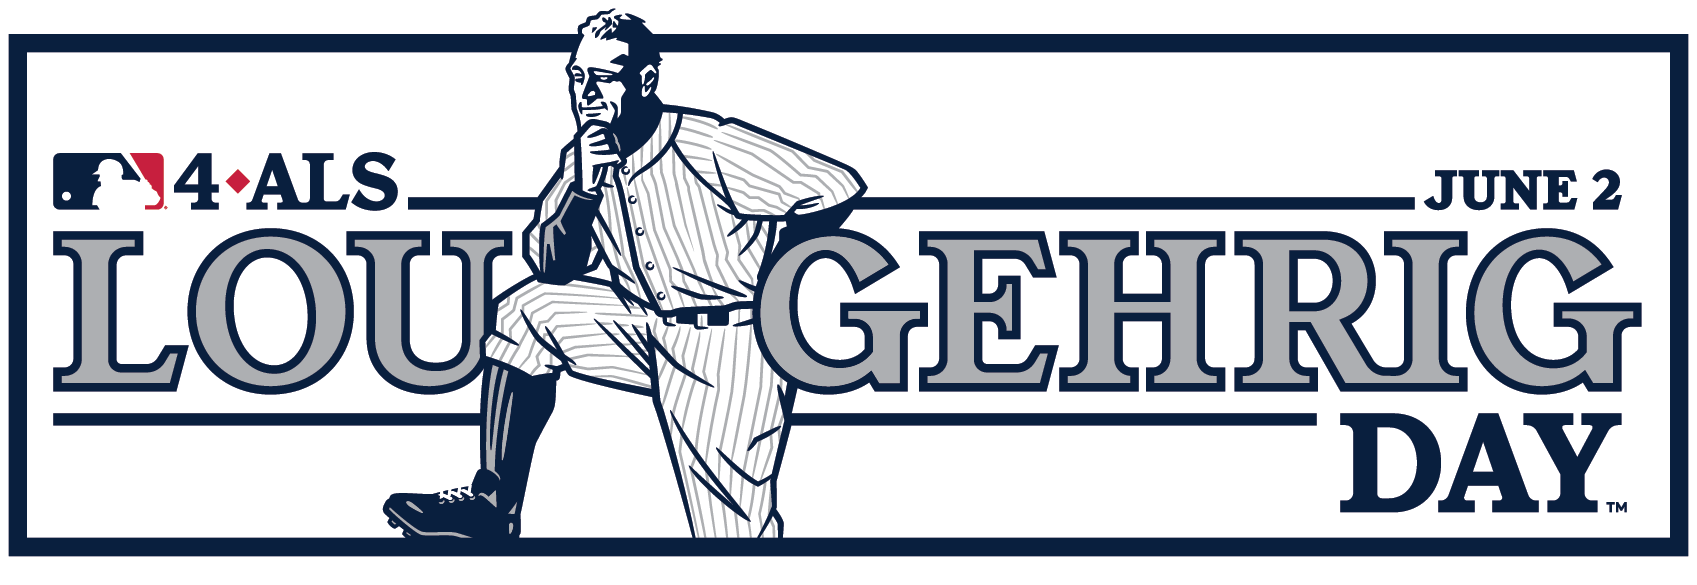 lou gehrig day 2023